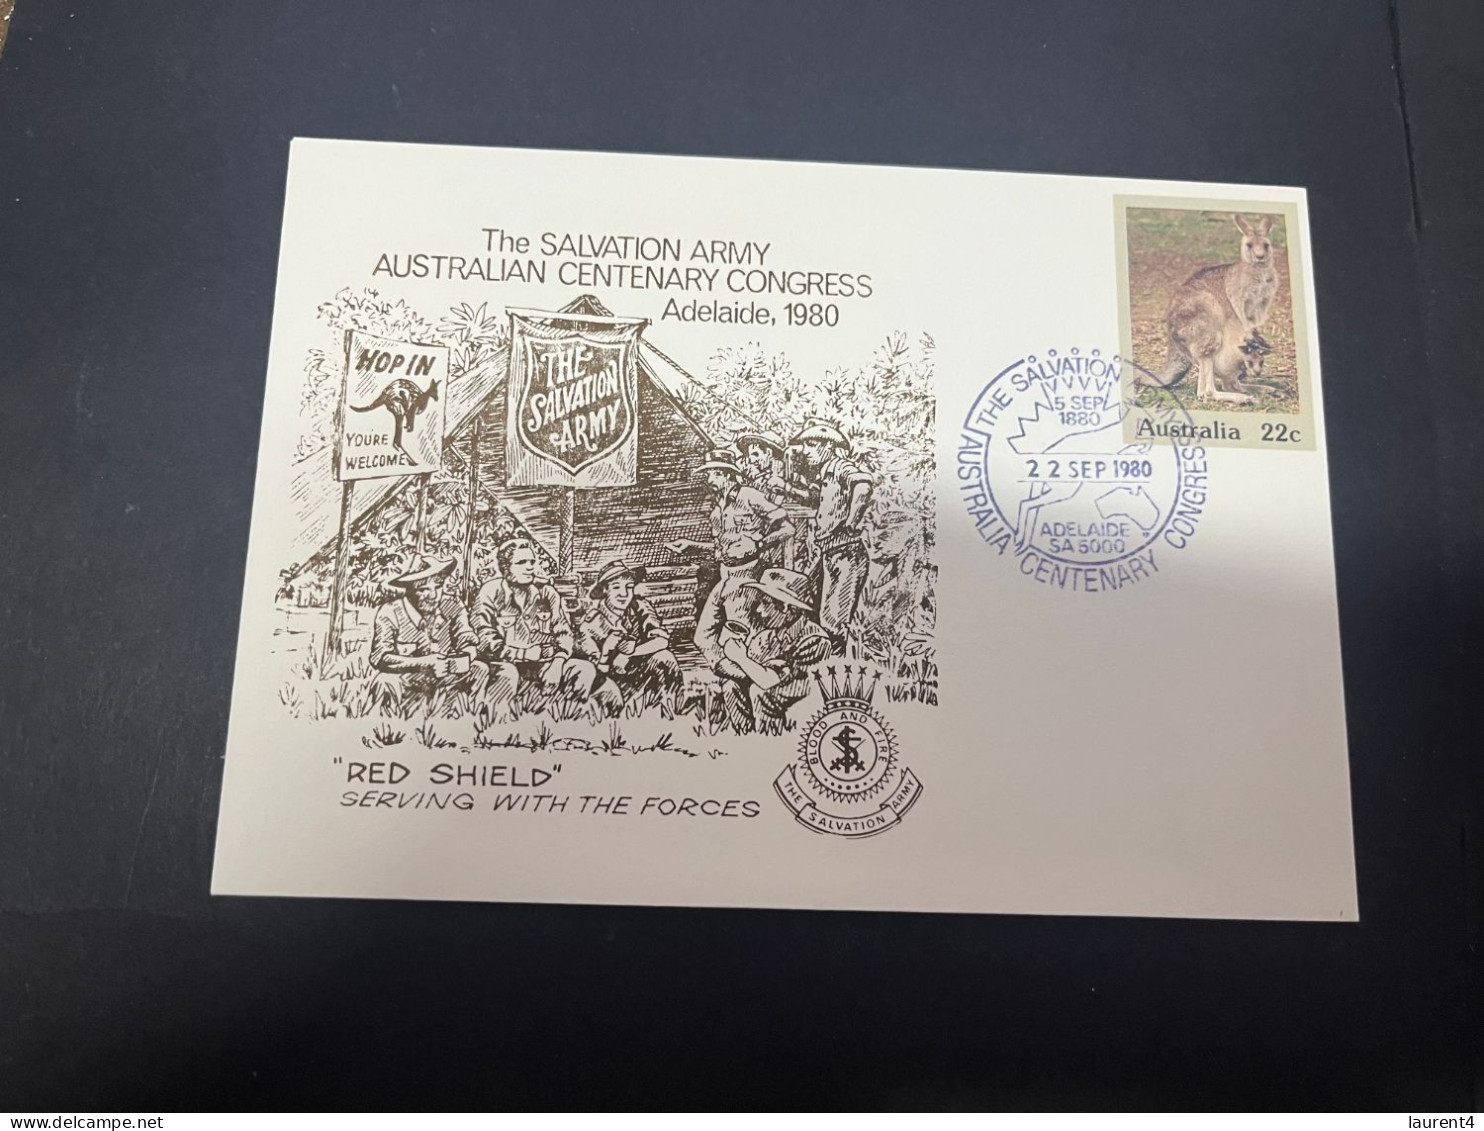 2-5-2024 (3 Z 39) Australia FDC (1 Covers) 1980 - Salvation Army Australian Centenary Congress In Adelaide (Kangaroo) - Premiers Jours (FDC)